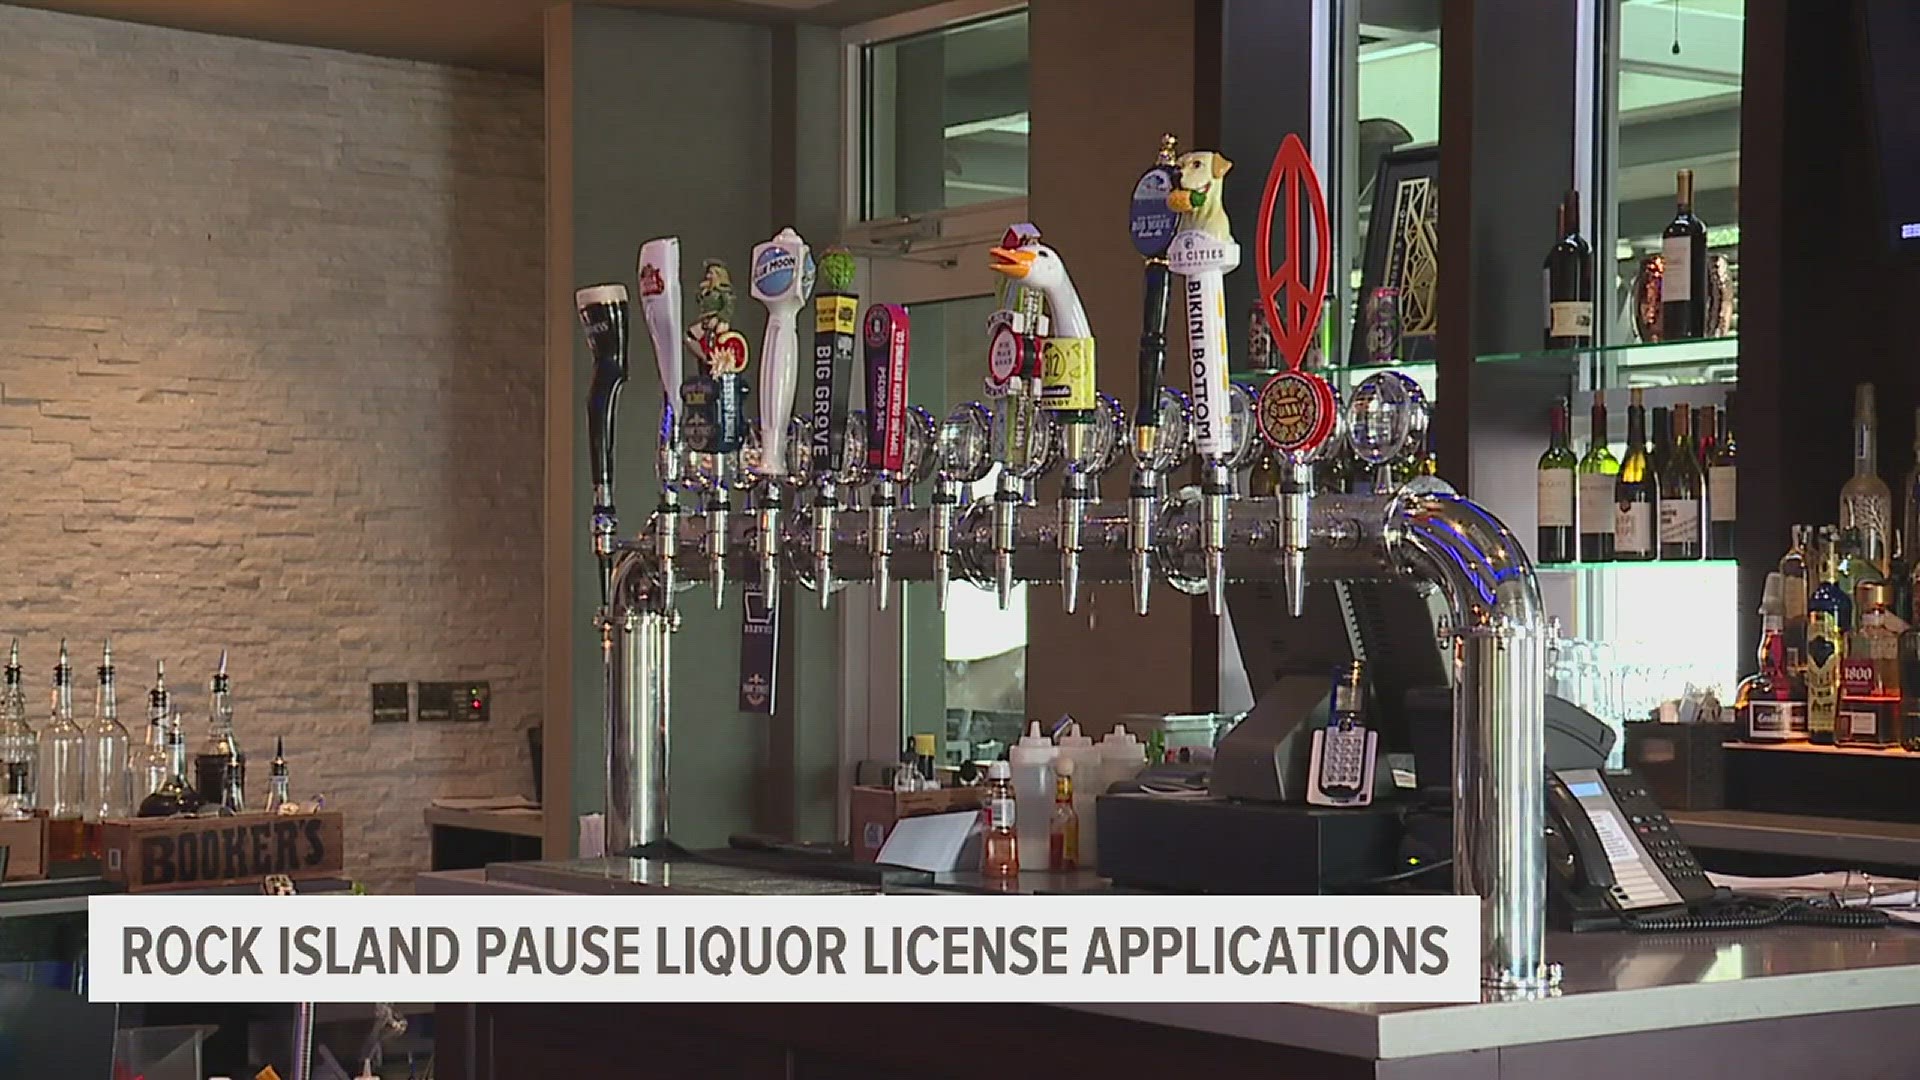 The city will take the next six months to re-evaluate their liquor license process